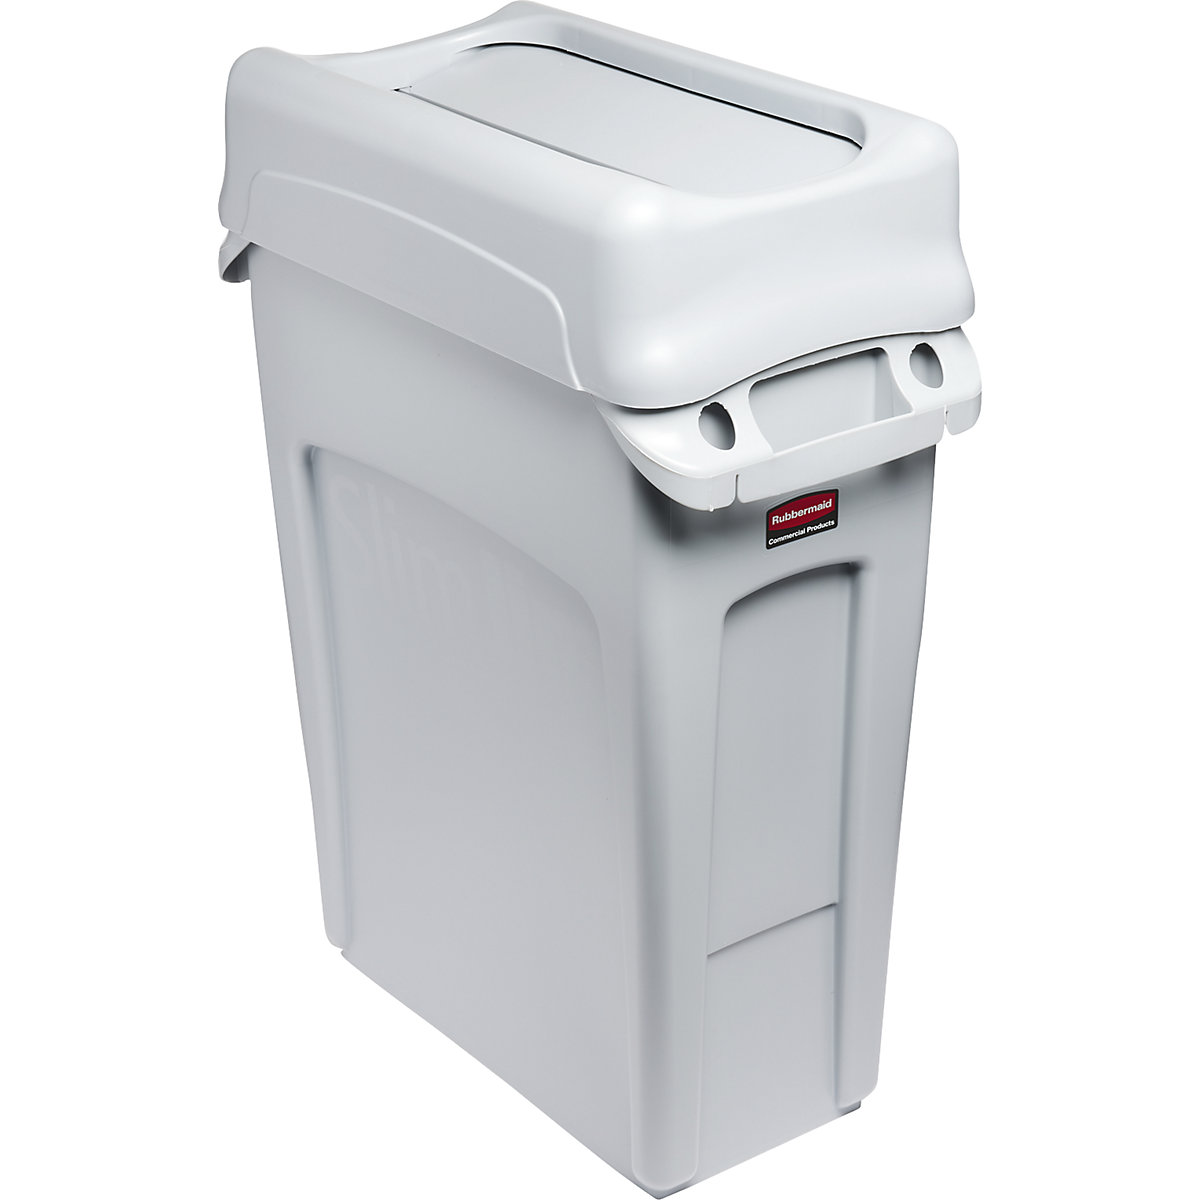 SLIM JIM® recyclable waste collector - Rubbermaid